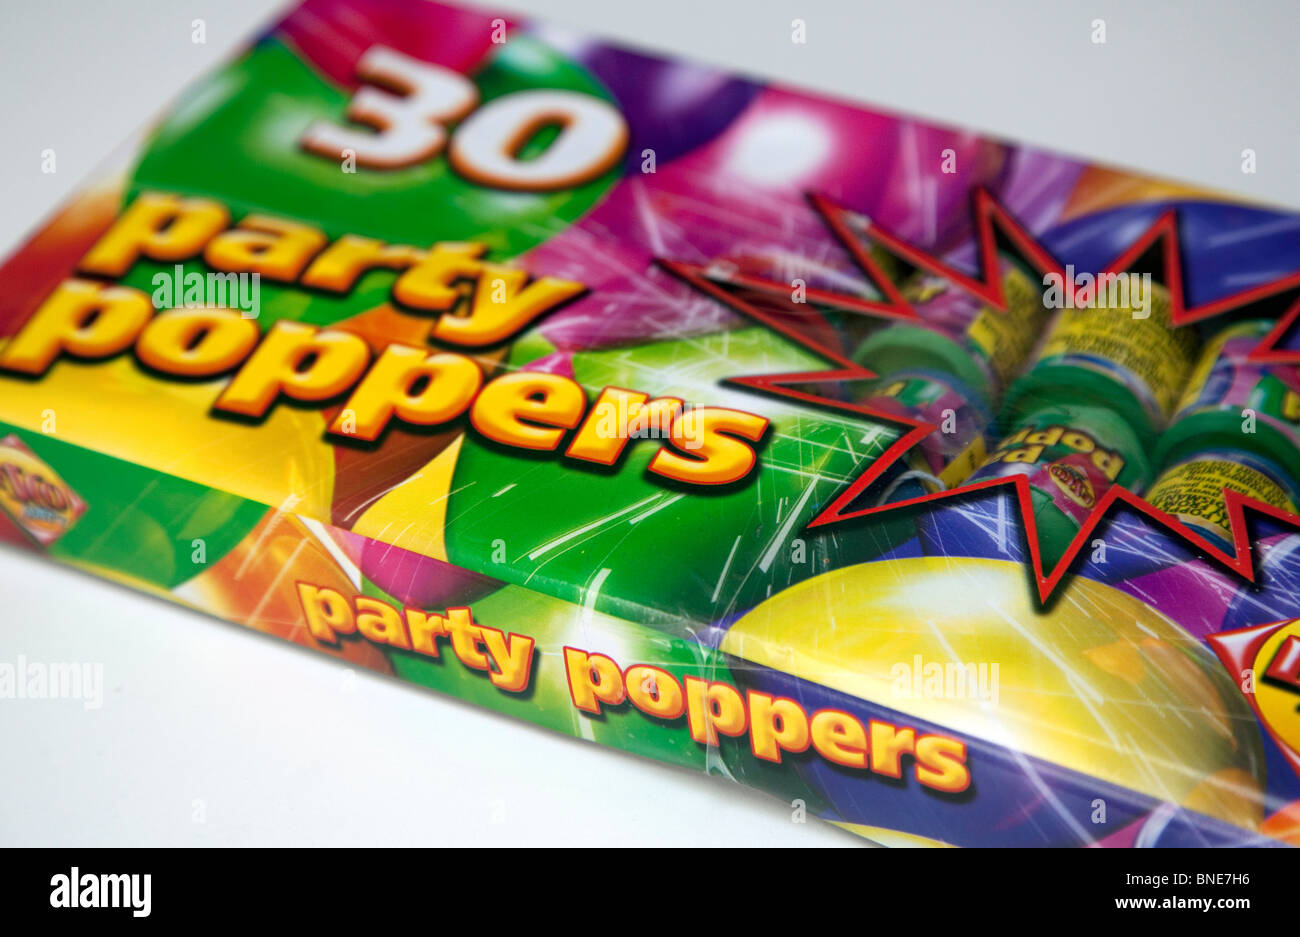 Box of party poppers, London Stock Photo